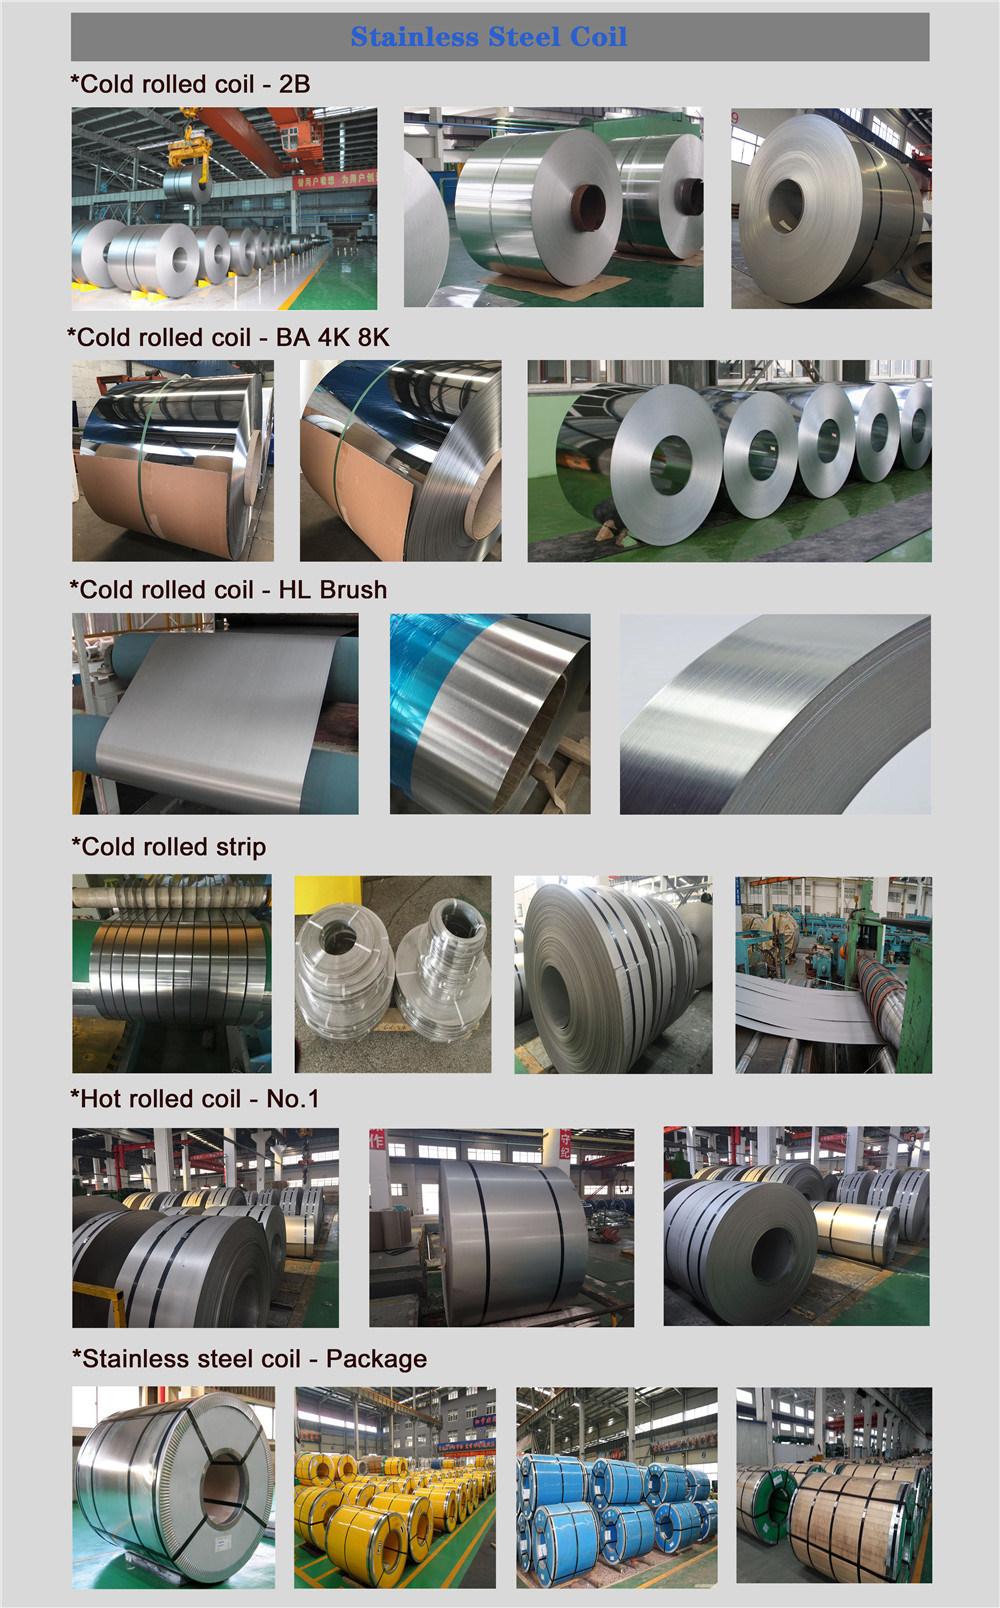 Hot Selling Product Cutting Narrow High Quality Steel 304 Stainless Steel Coil Strips